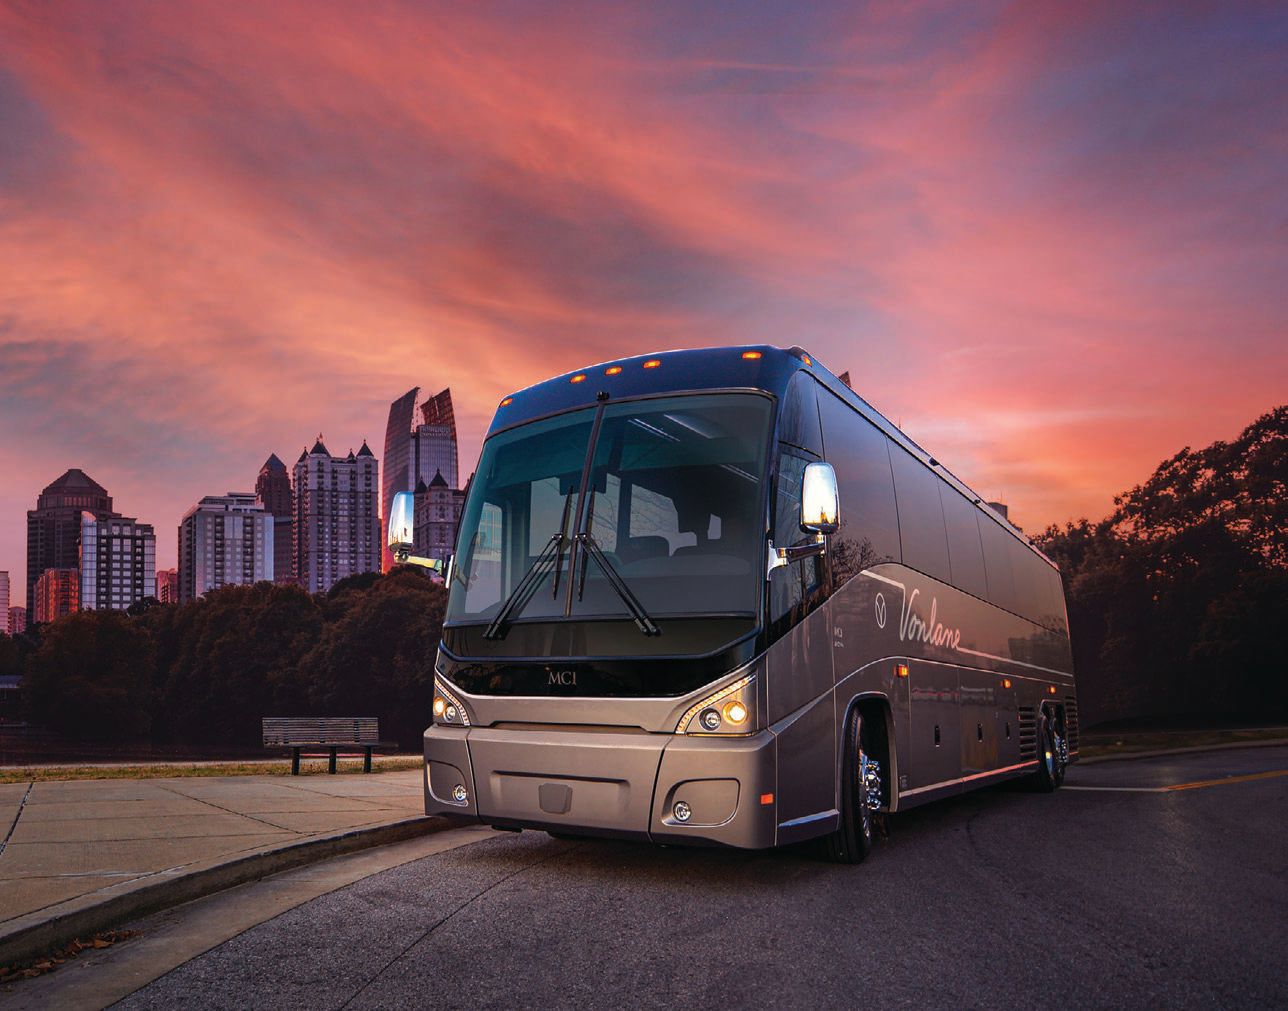 The sleek exterior introduces passengers to the luxury traveling experience PHOTO COURTESY OF VONLANE